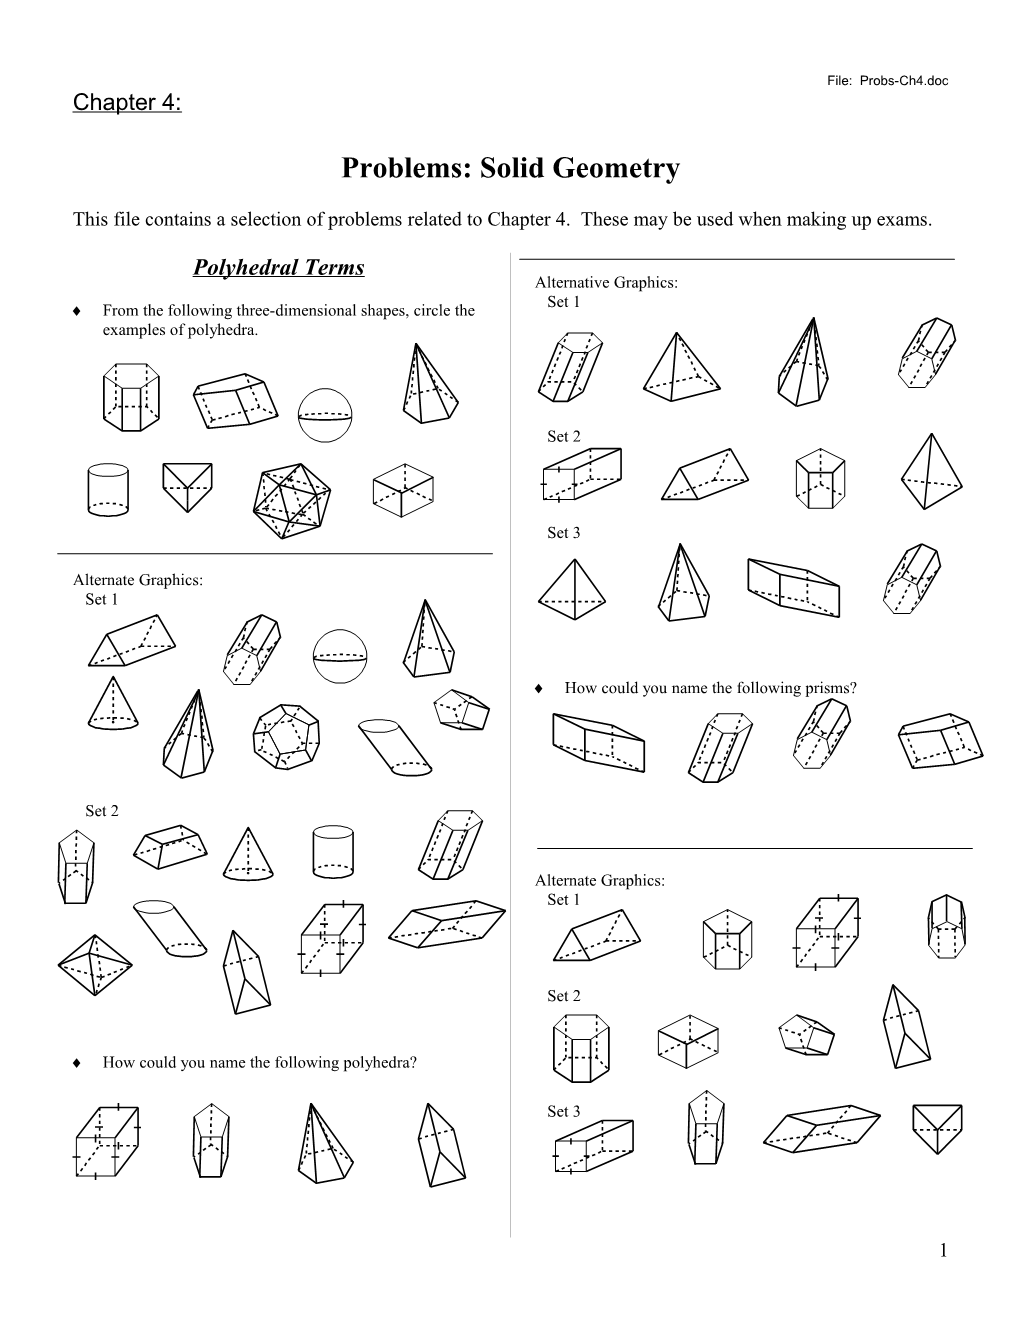 Problems: Solid Geometry